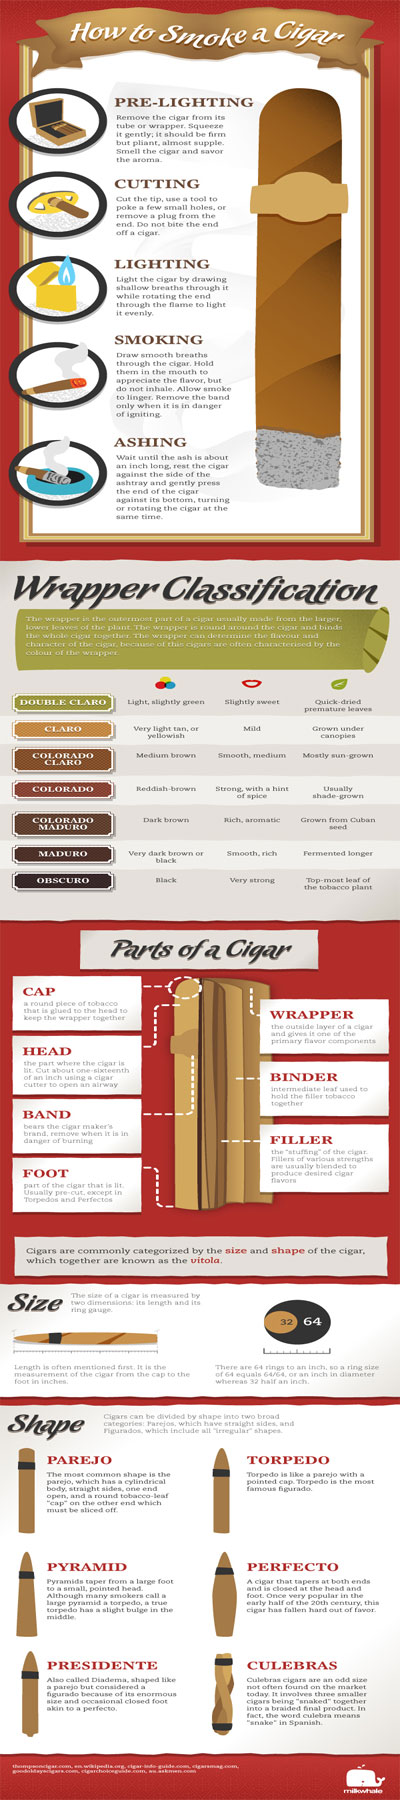 Infographic for How to Smoke a Cigar Infographic